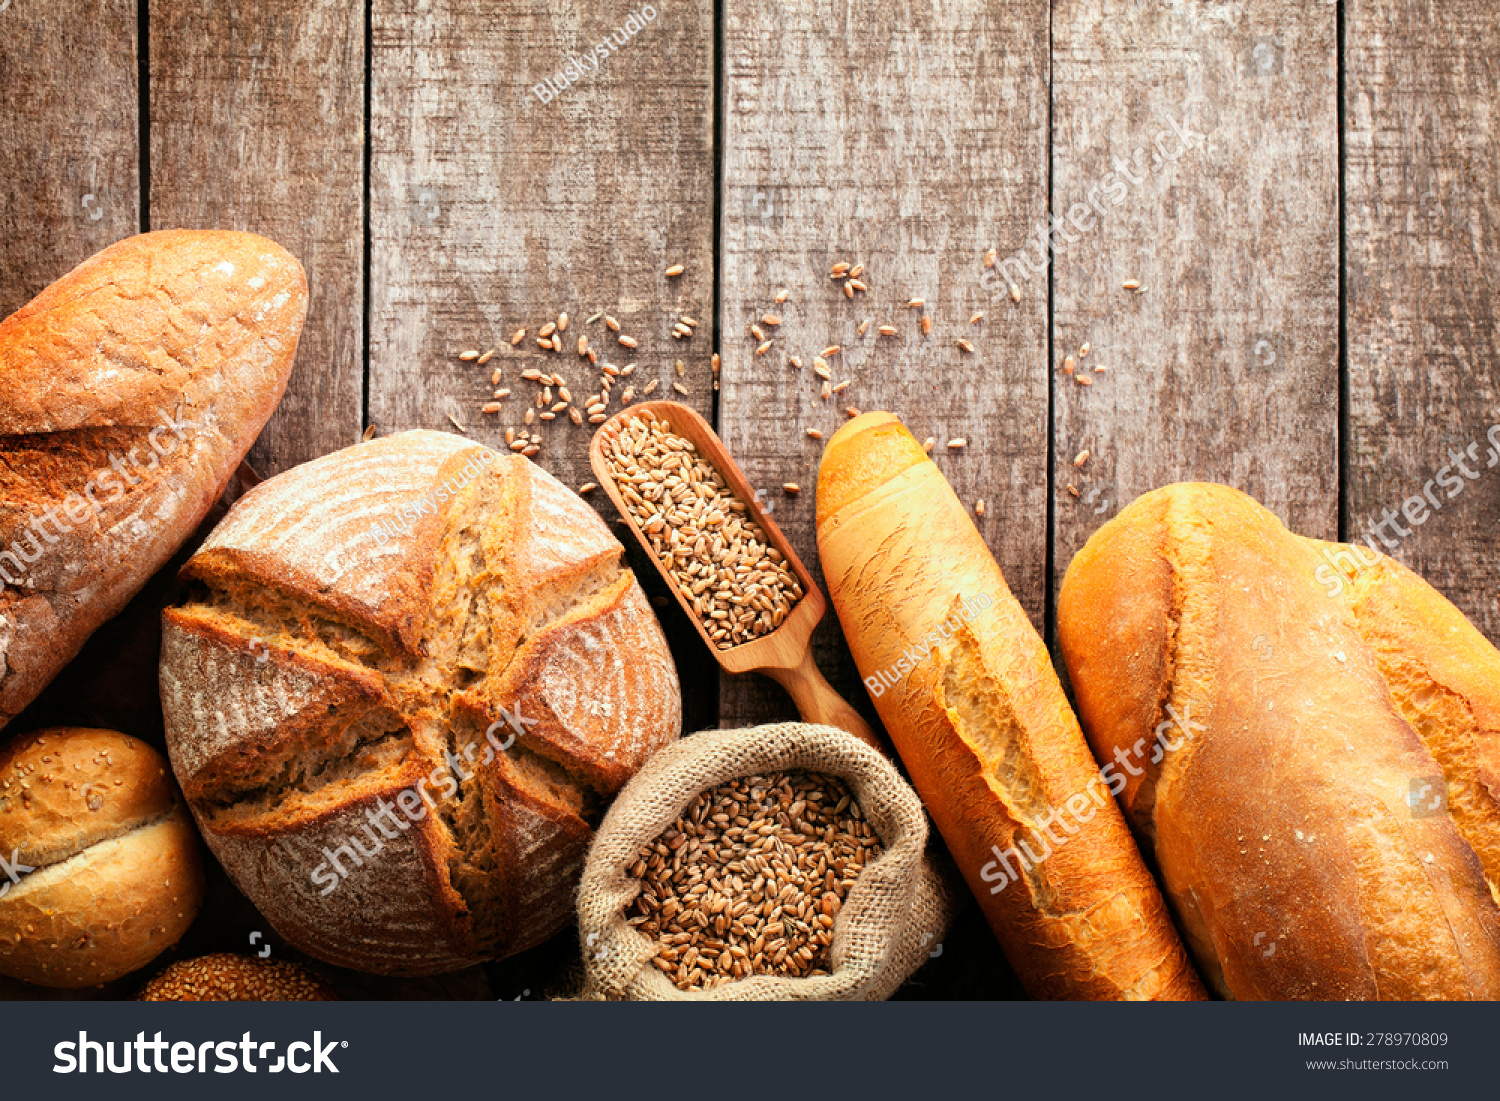 Assortment of baked bread on wooden table background #278970809